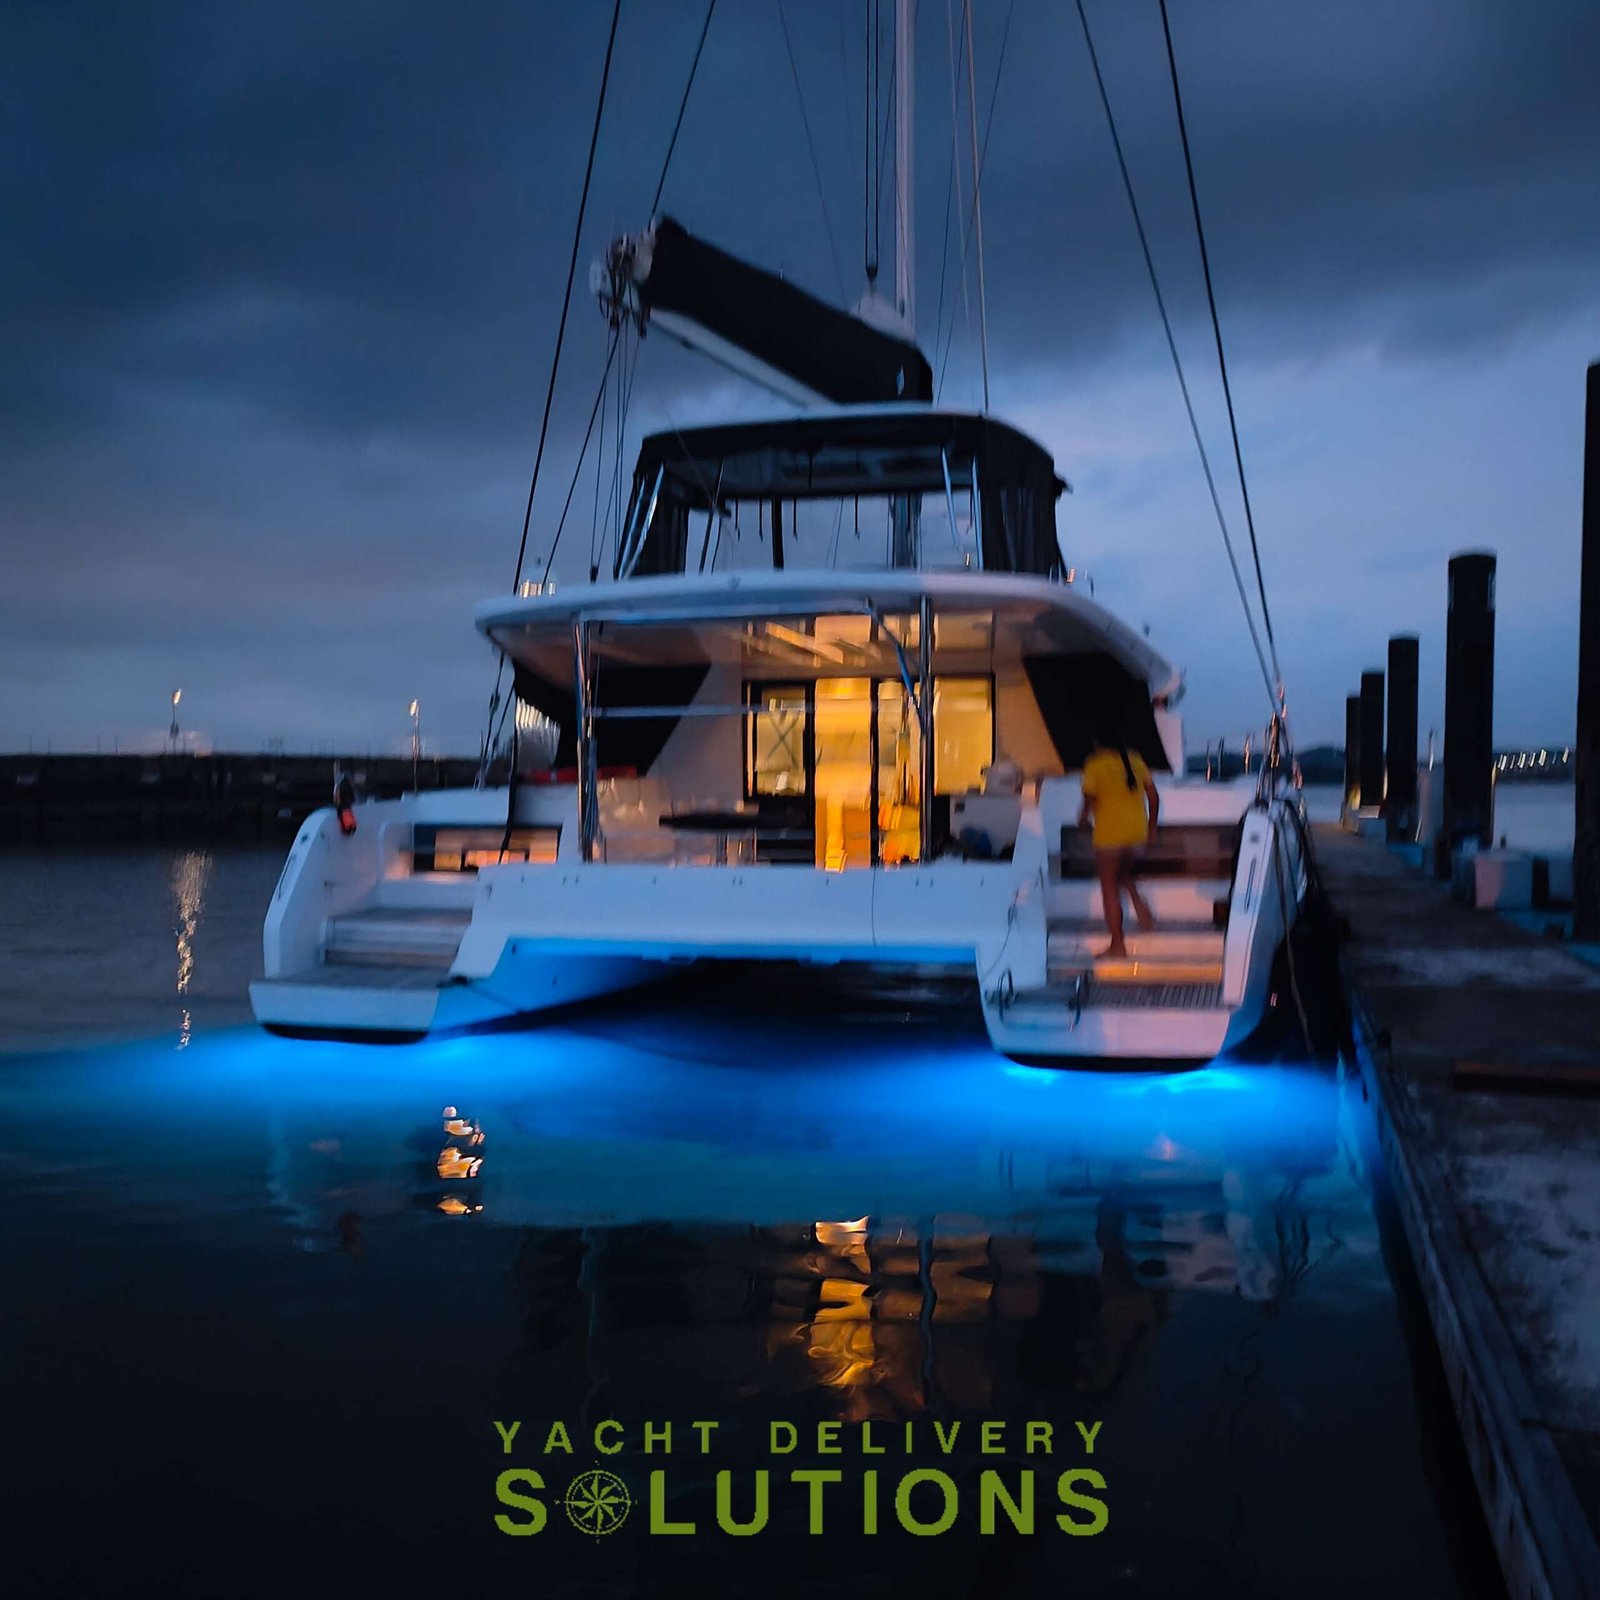 lagoon 50 in Raffles marina Singapore to be delivered by yacht delivery solutions